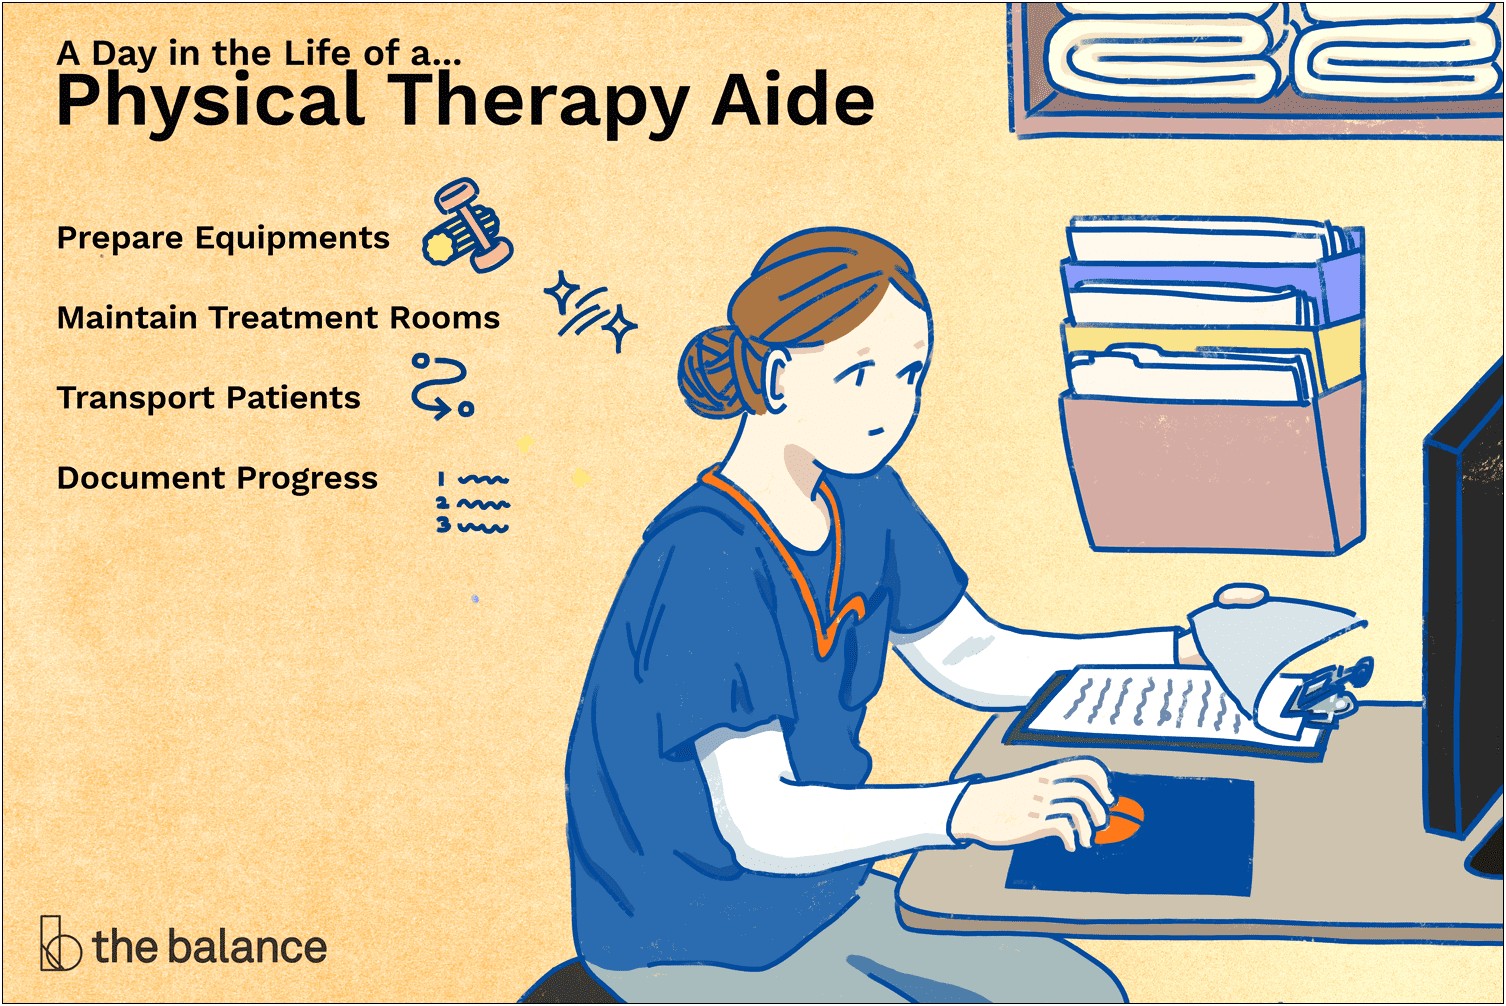 Resume Skills For Physical Therapy Aide